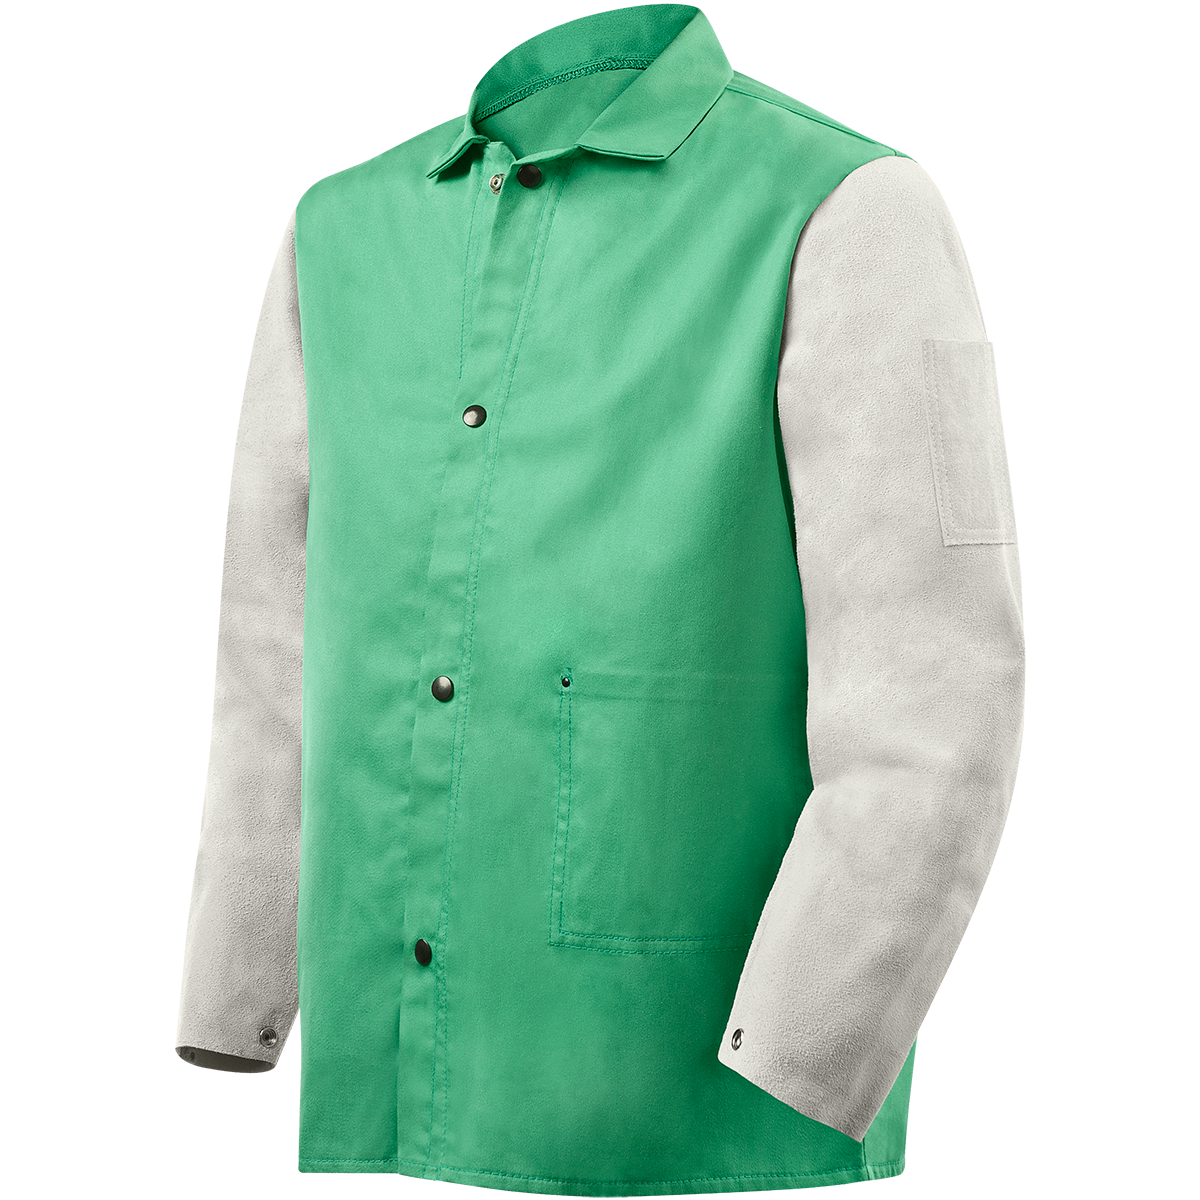 Weldlite Plus™ Hybrid 9 oz FR Cotton With Leather Sleeves Jacket - 30" Green/Gray